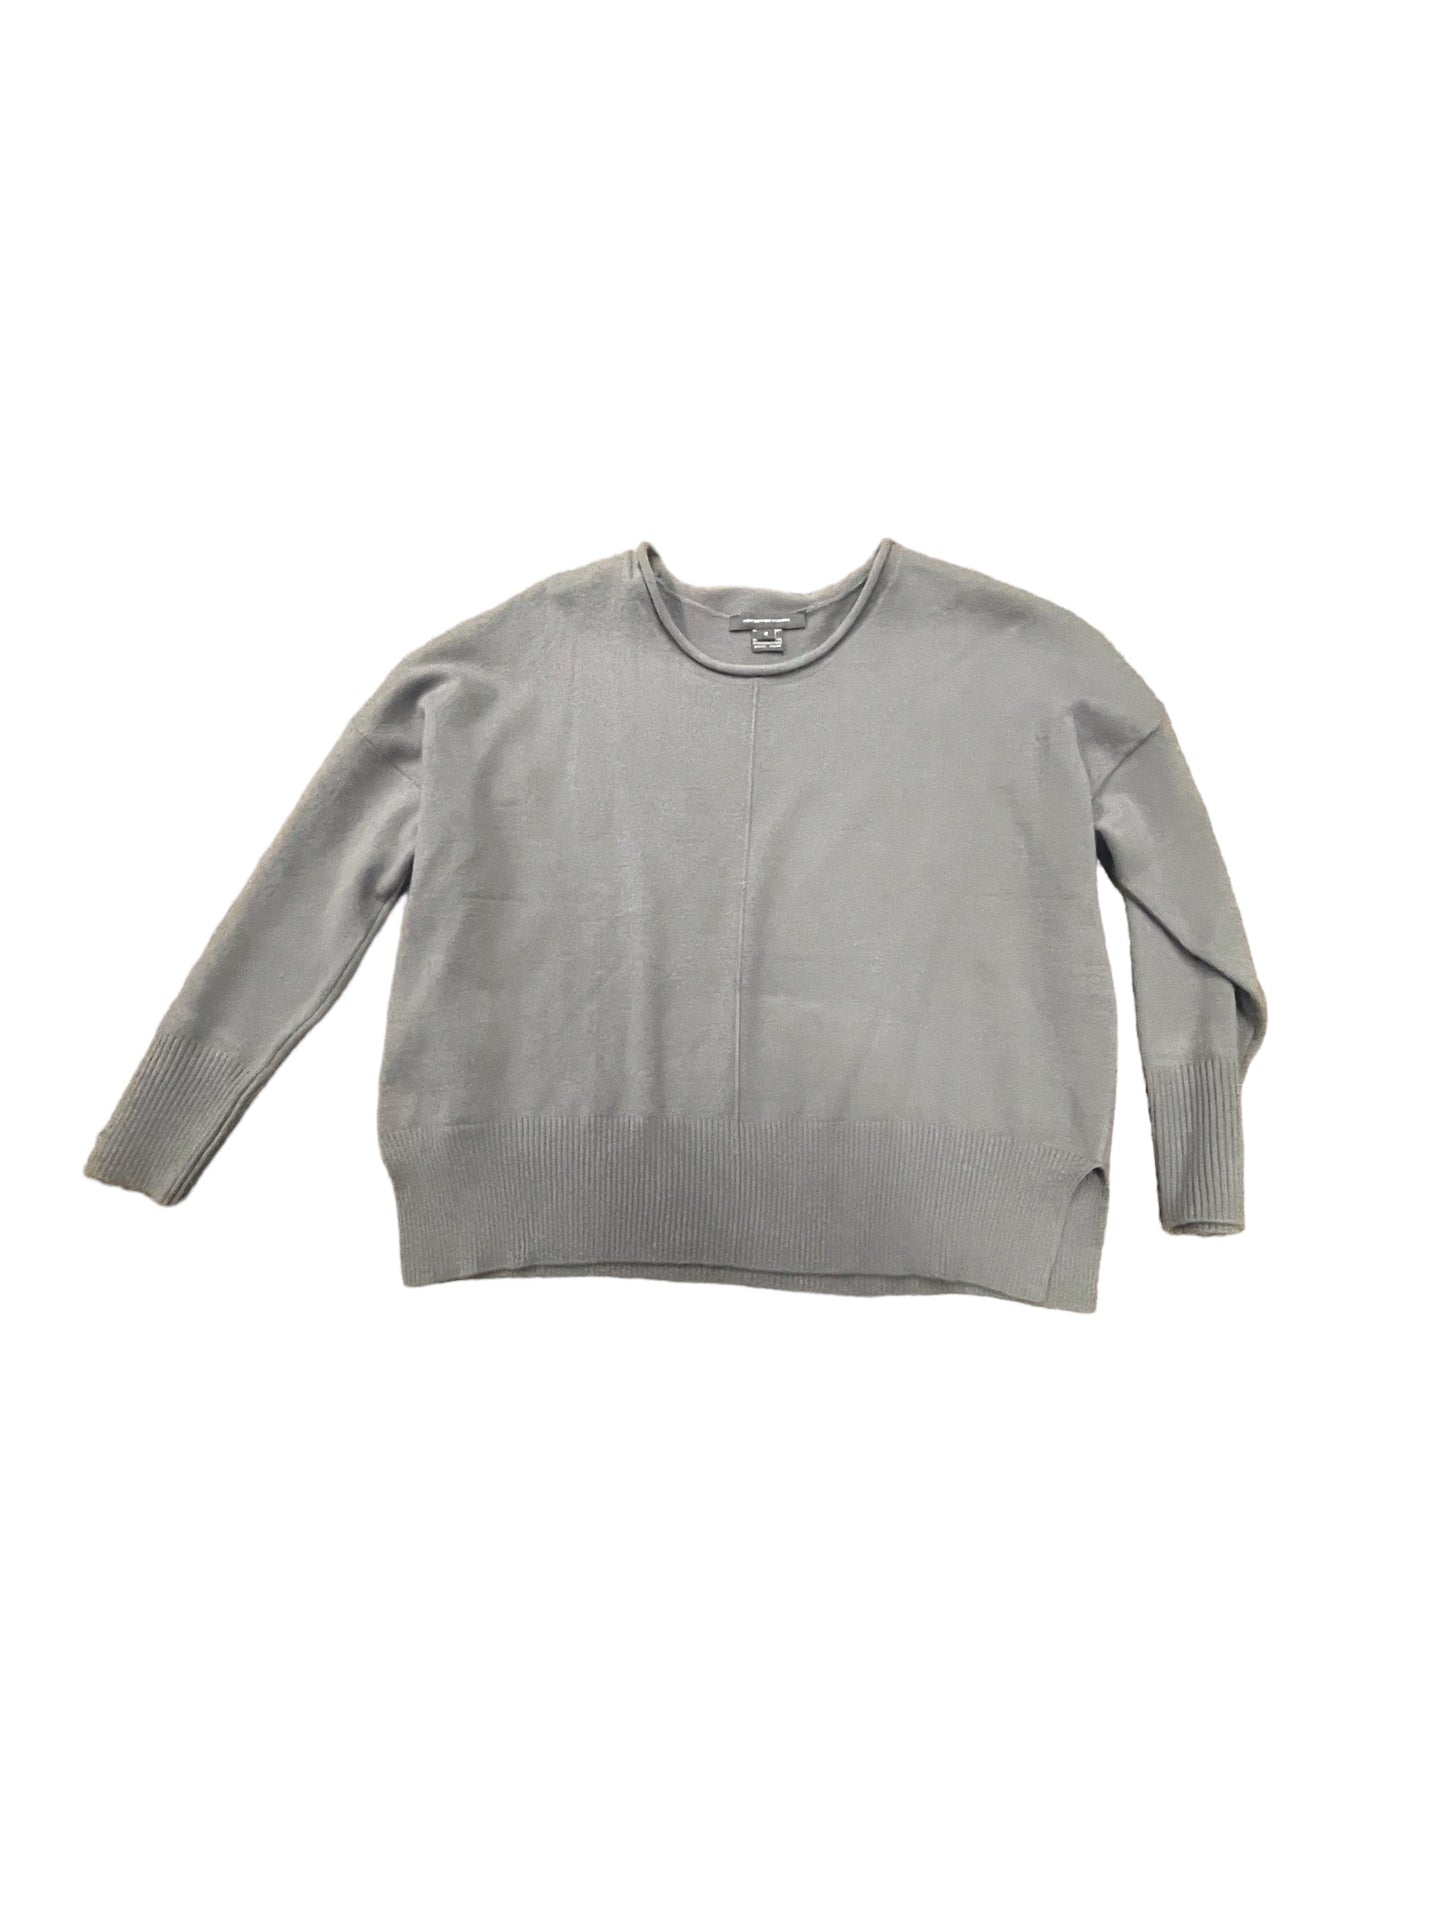 Sweatshirt Crewneck By French Connection  Size: S